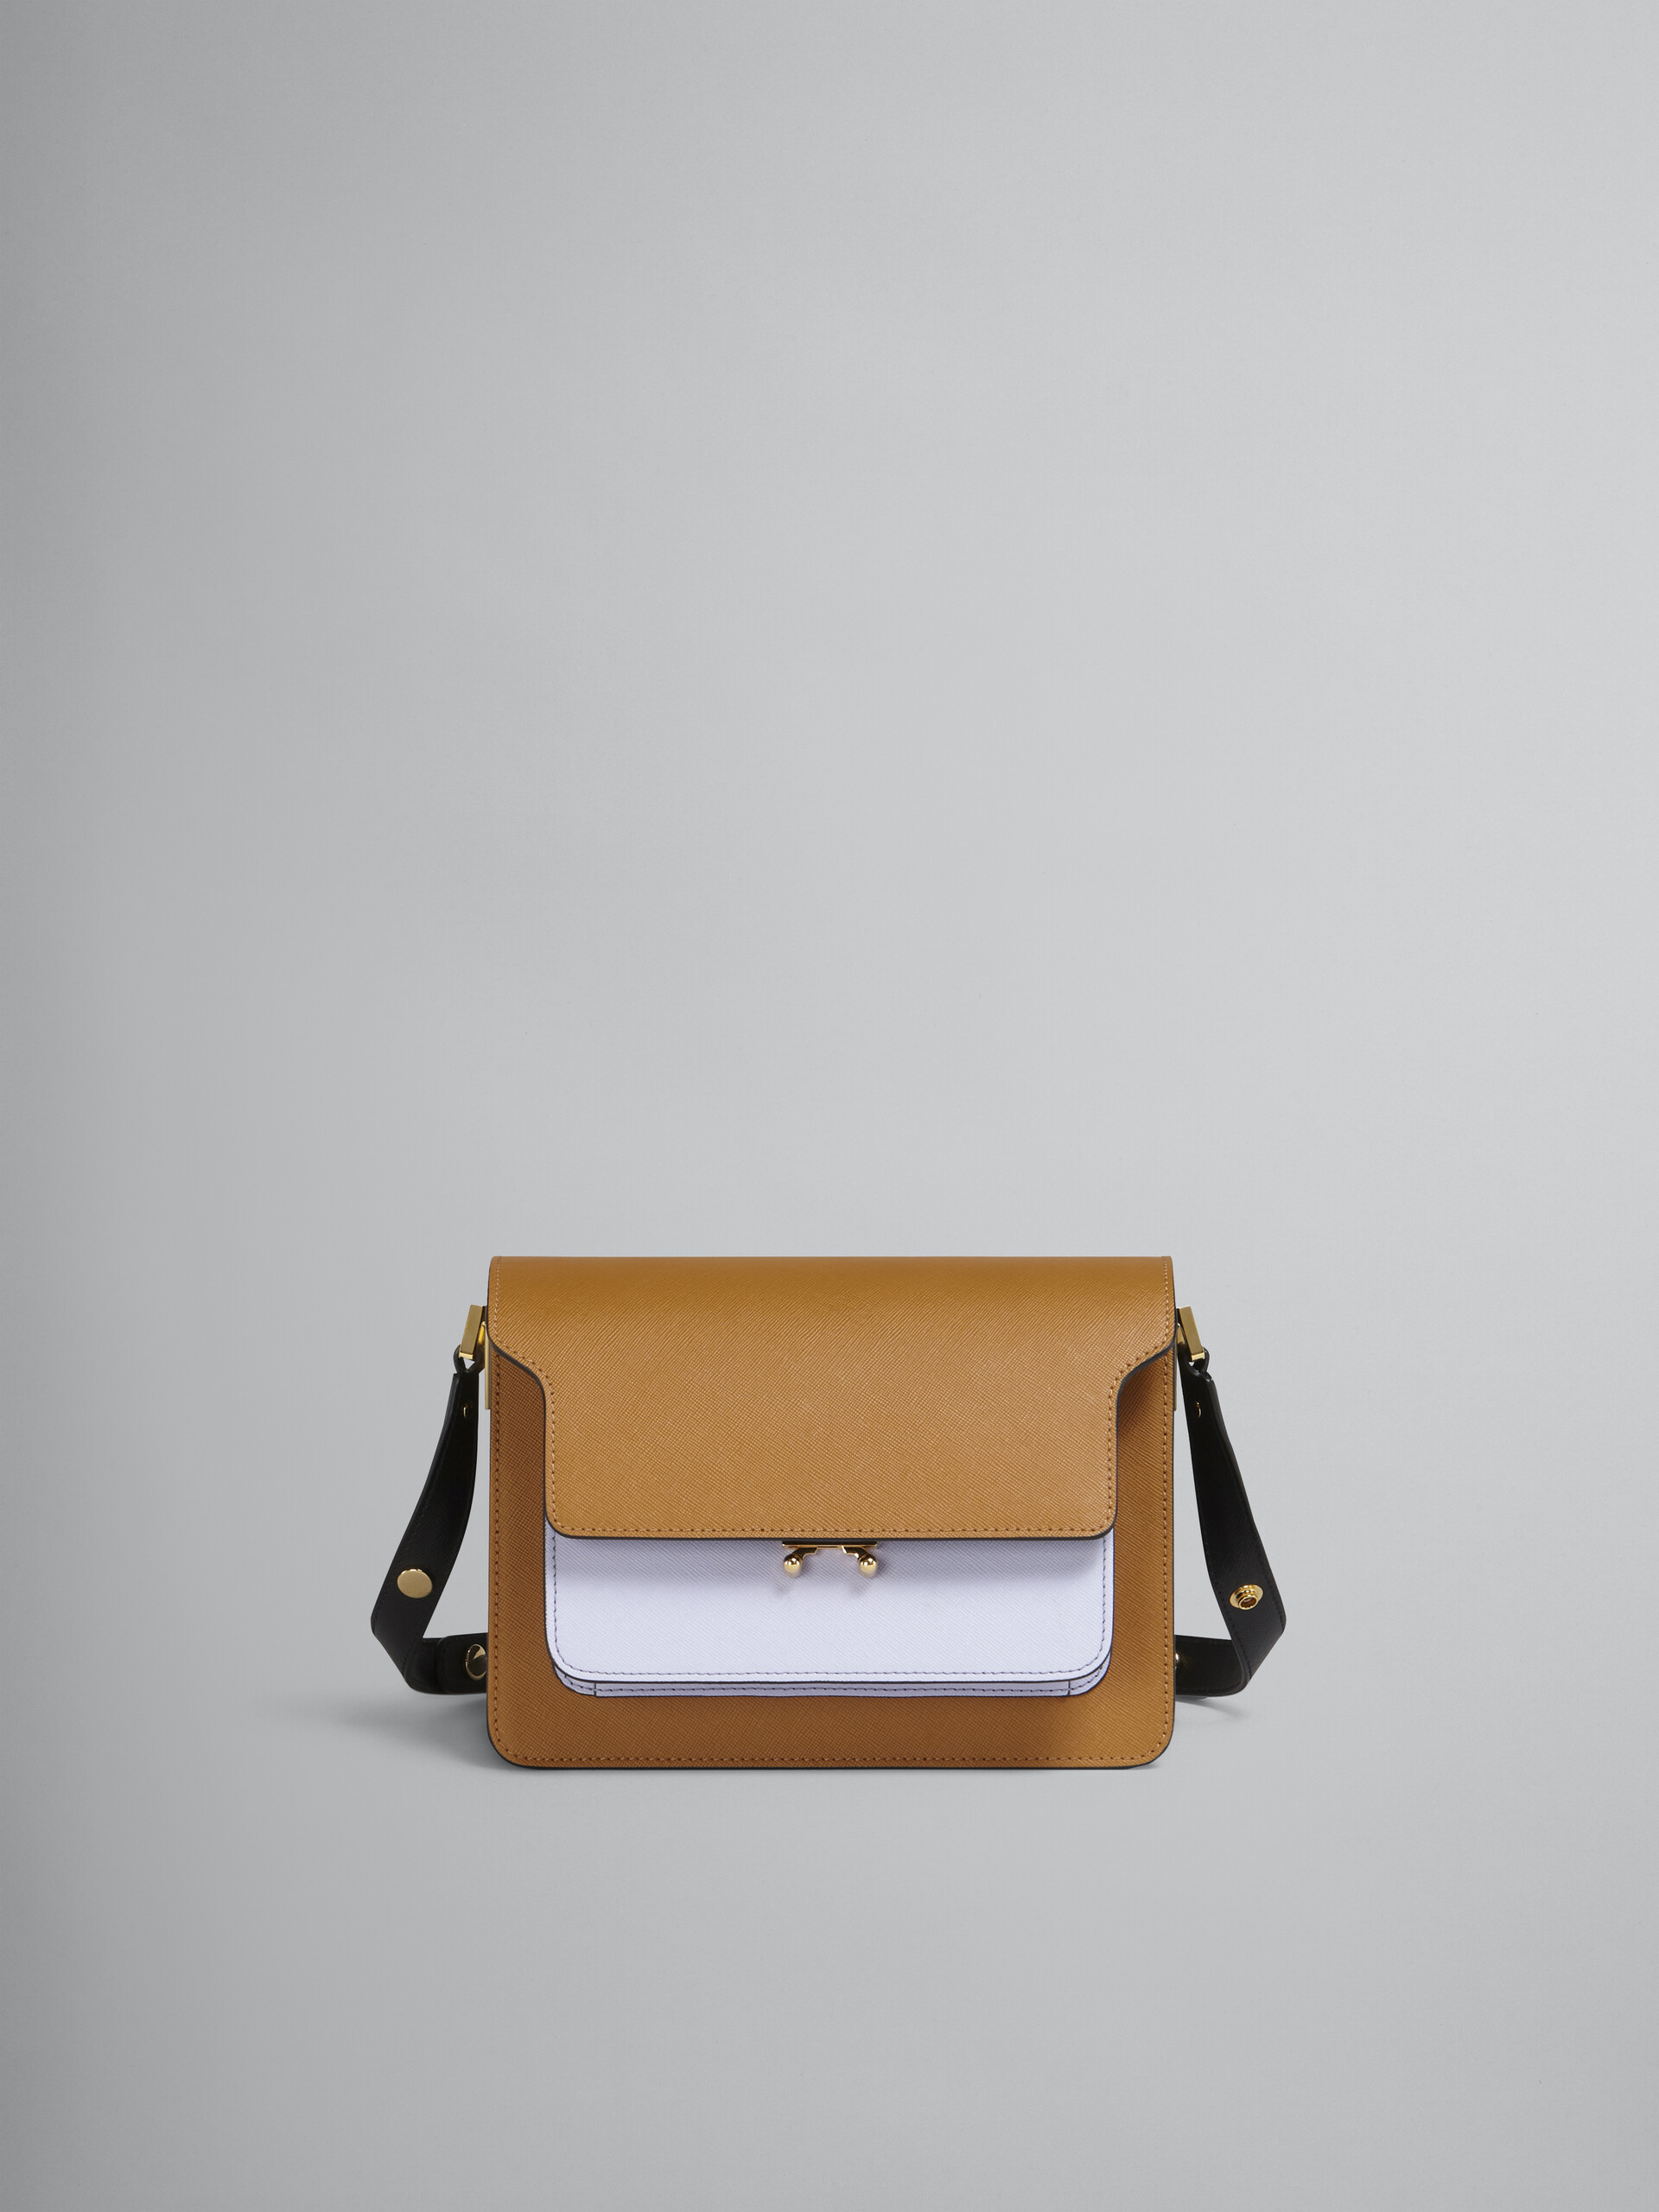 TRUNK medium bag in grey brown and black saffiano leather